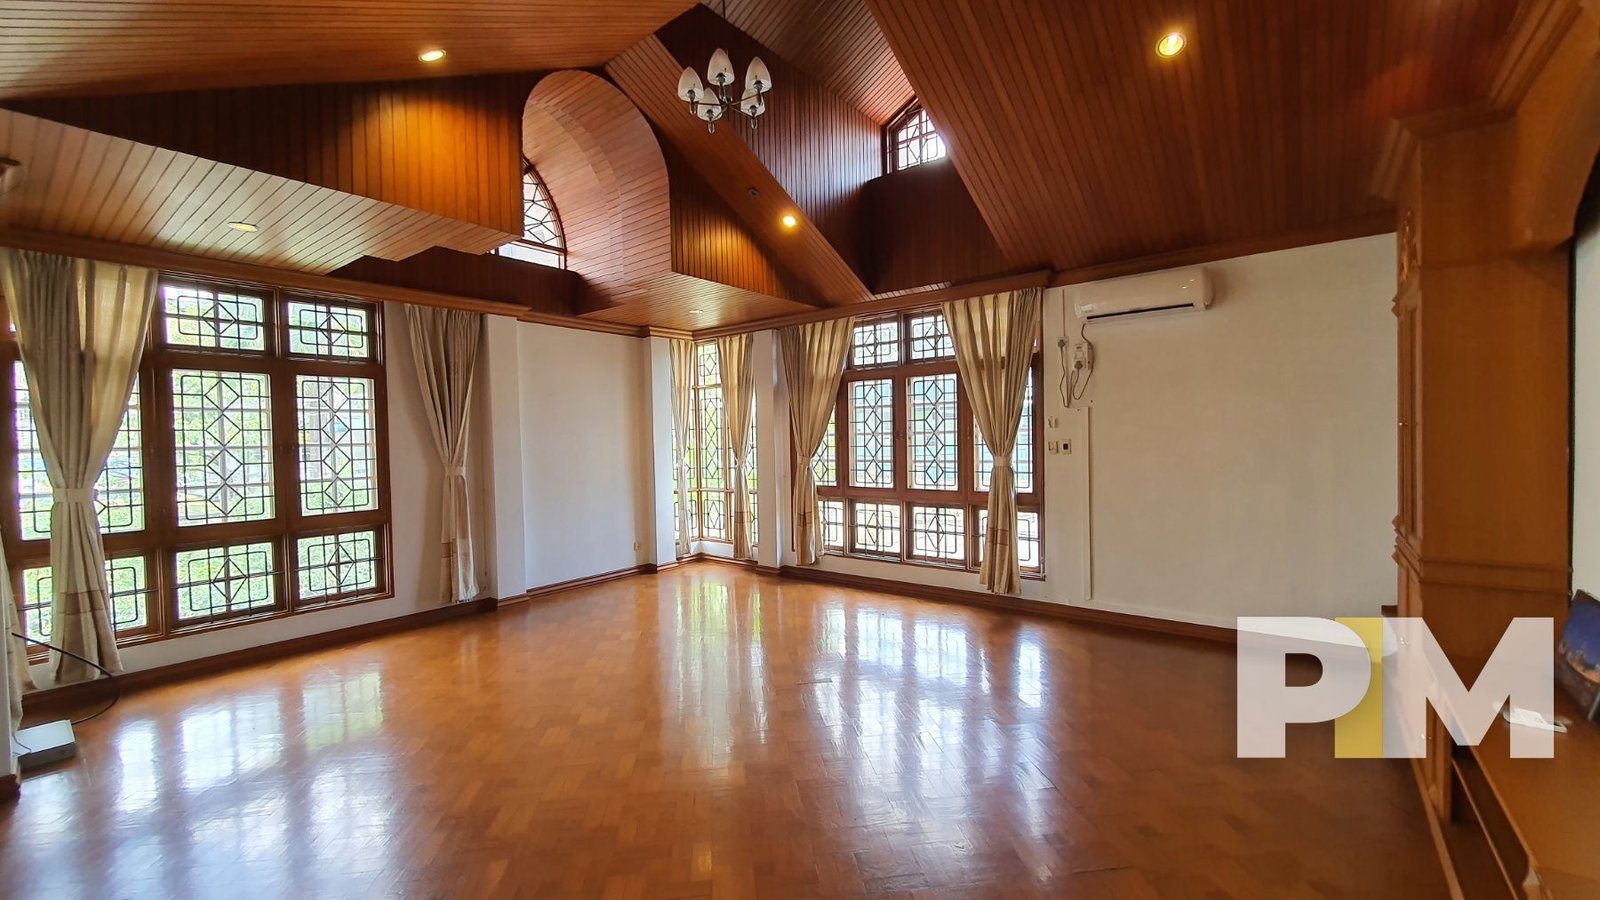 large windows and unique ceiling - property in yangon